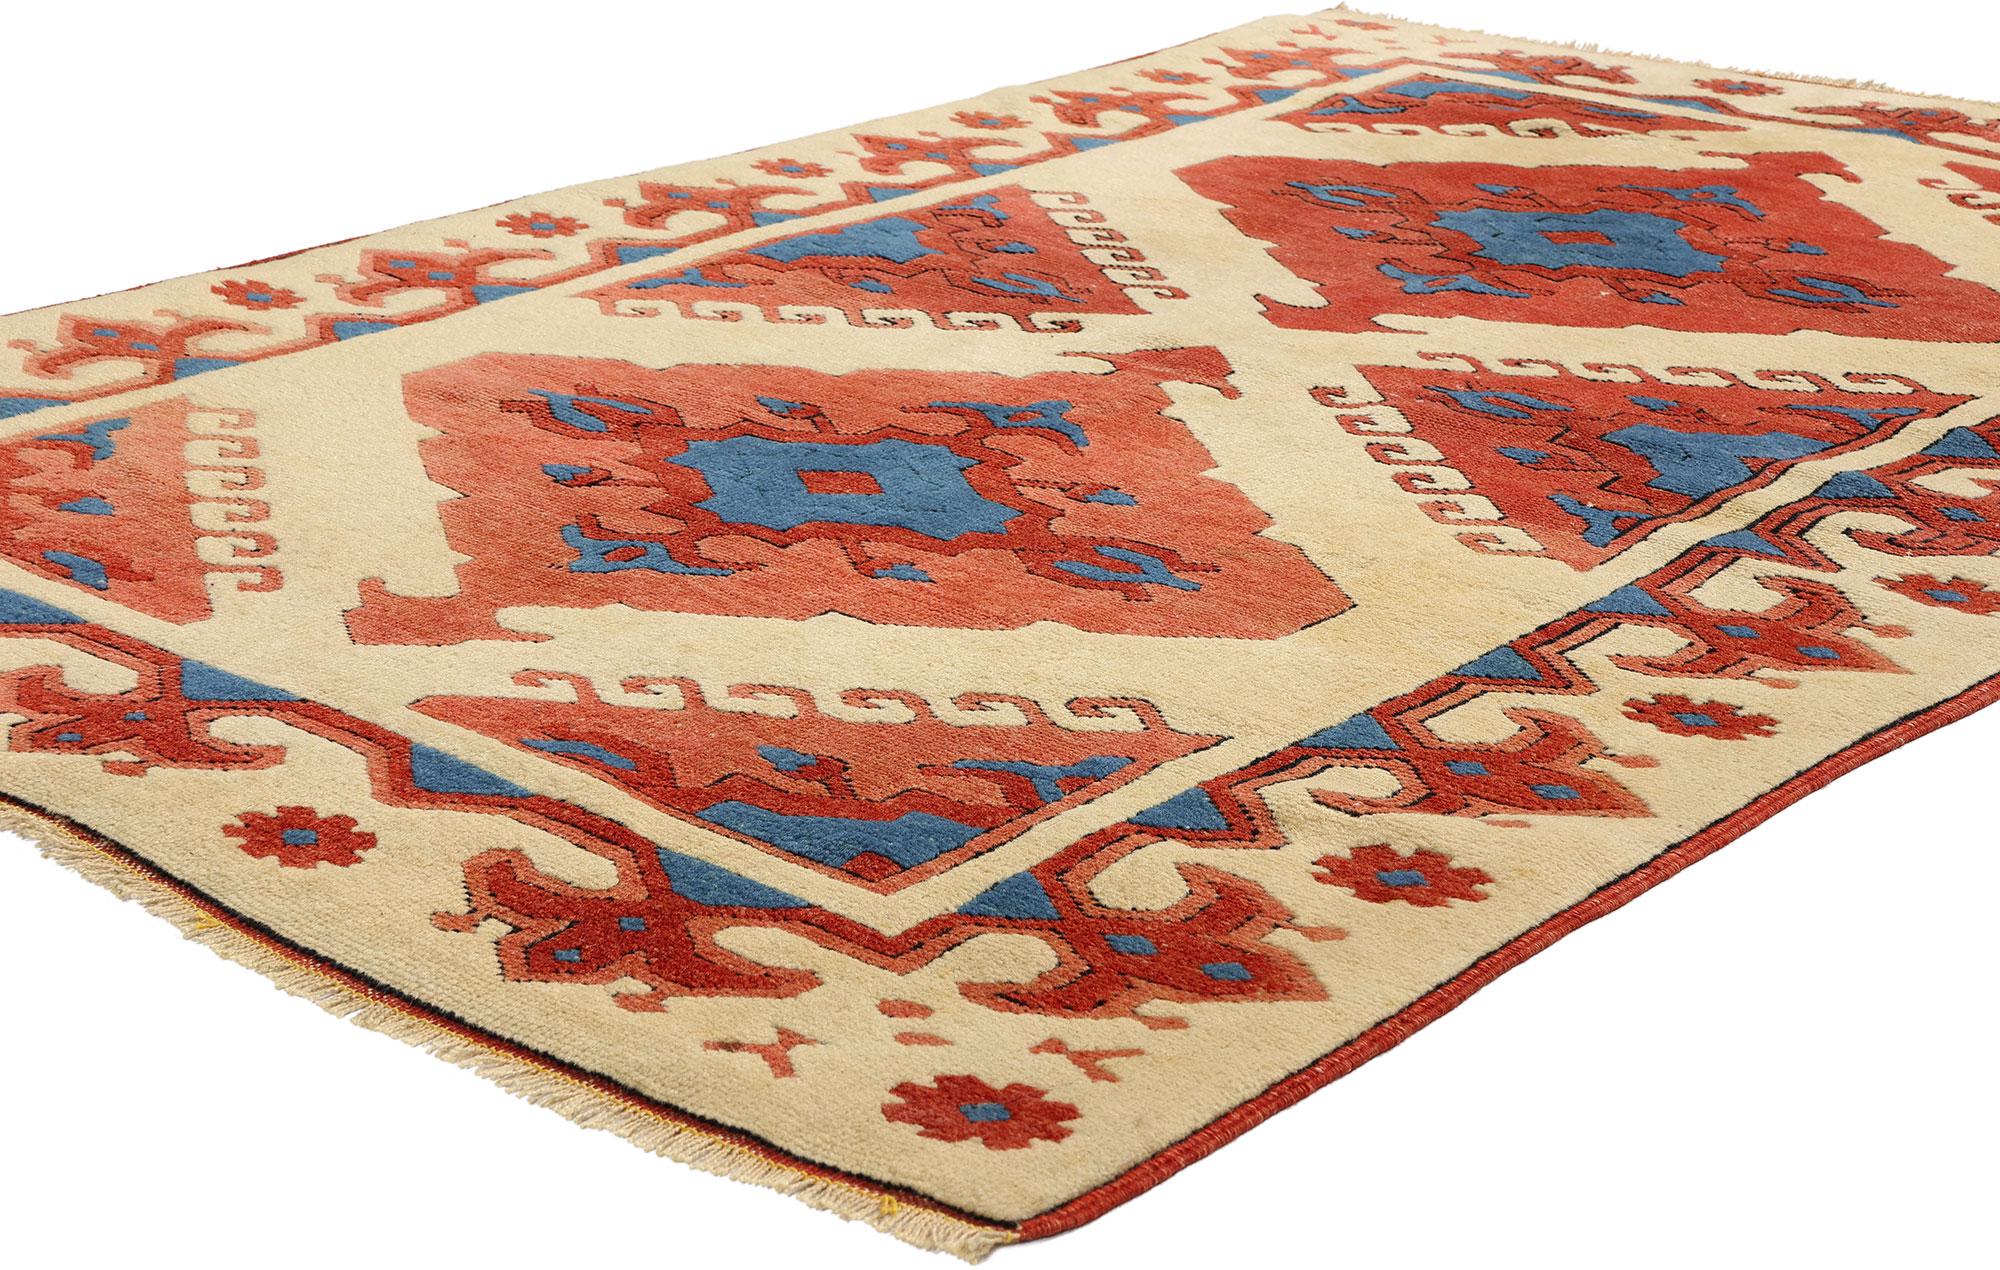 53933 Vintage Turkish Oushak Rug, 03'09 x 05'10. Turkish Oushak Konya rugs, originating from the Oushak region in western Anatolia, Turkey, are revered for their intricate geometric or floral designs, typically featuring motifs like medallions and